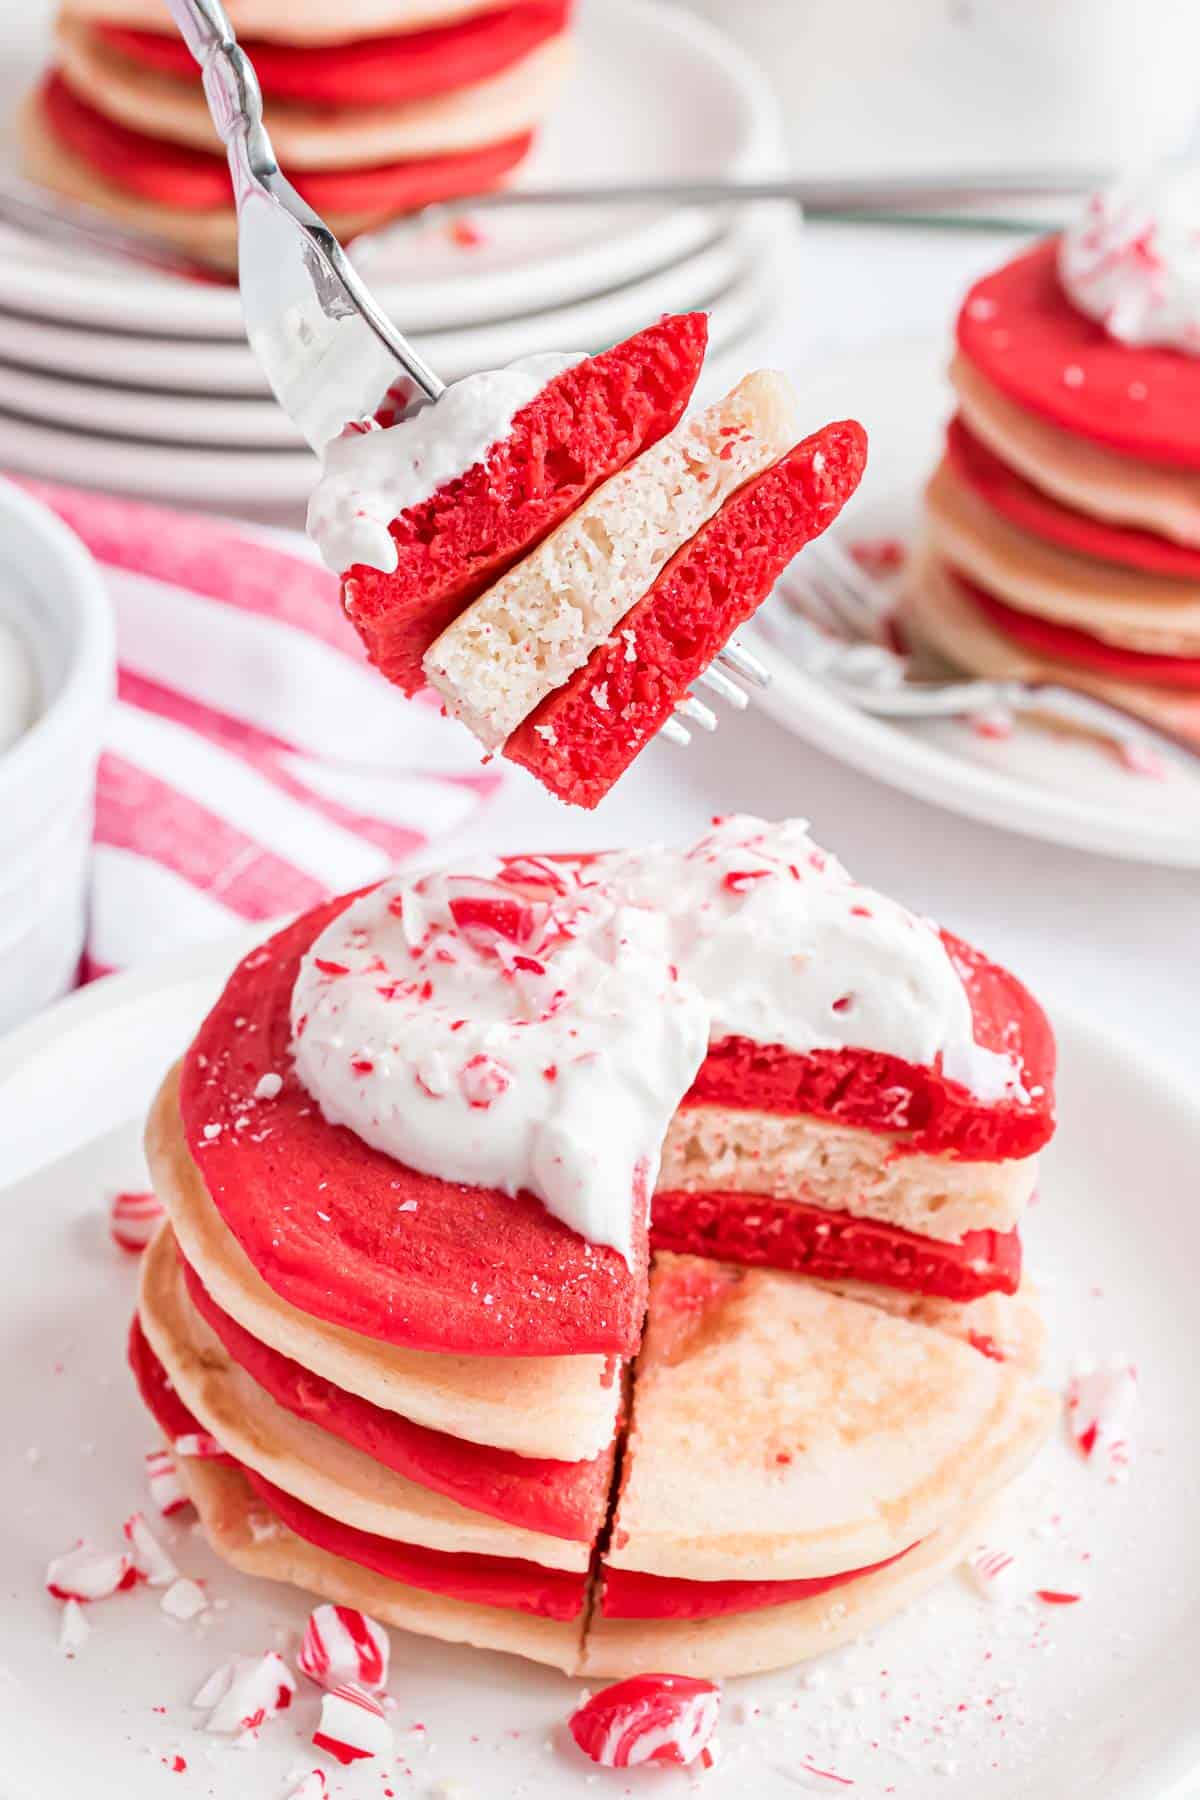 Red and white pancakes on a fork to show fluffy texture.